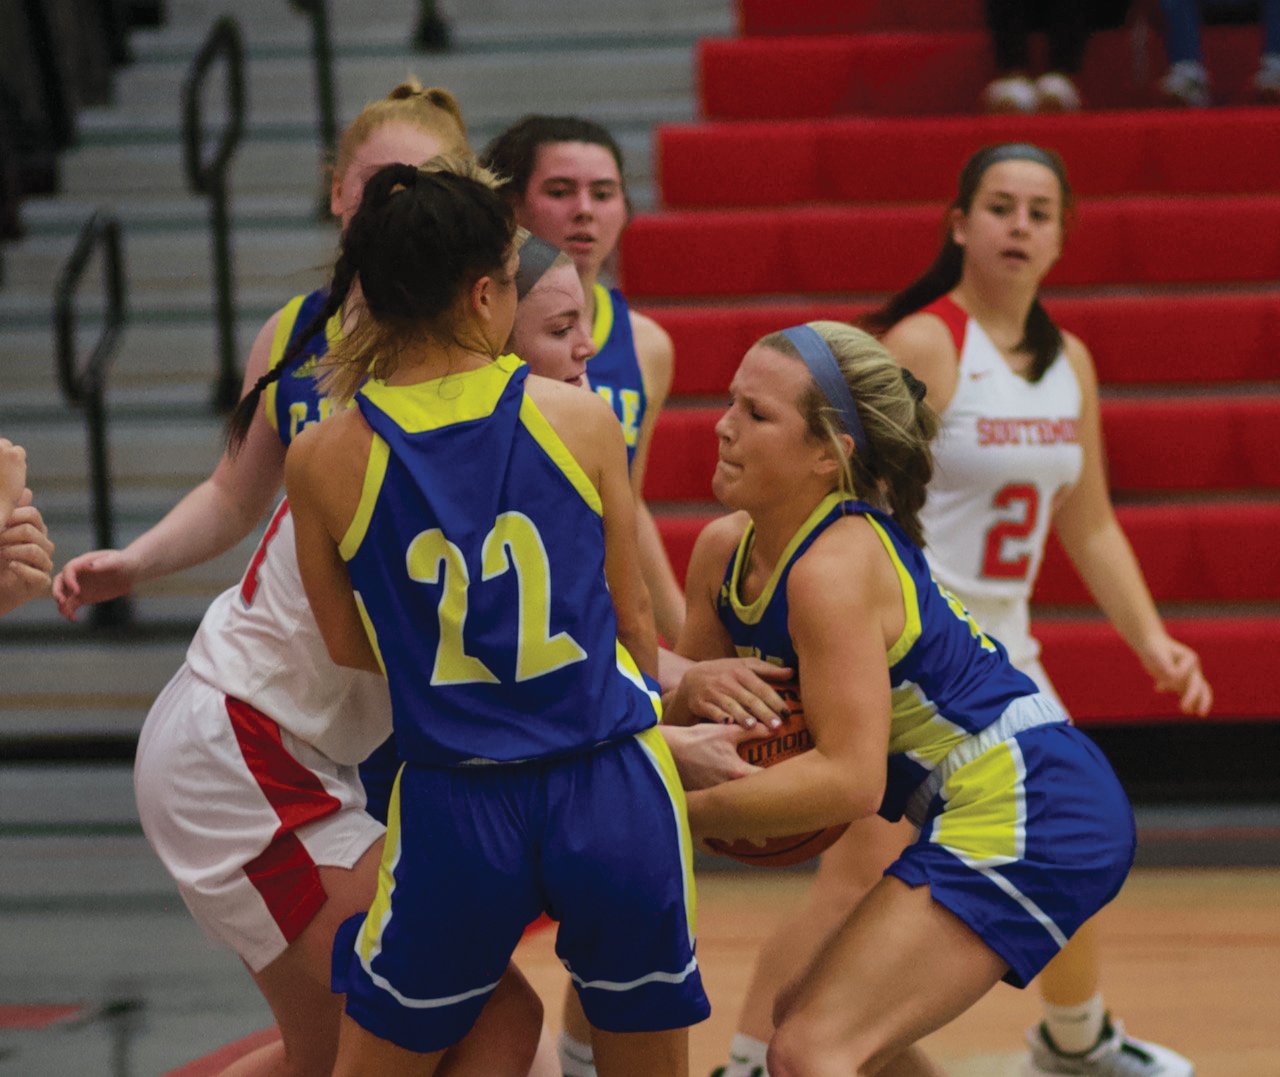 Crawfordsville’s Olivia Reed was the top scorer of the tournament with 31 points over two games.